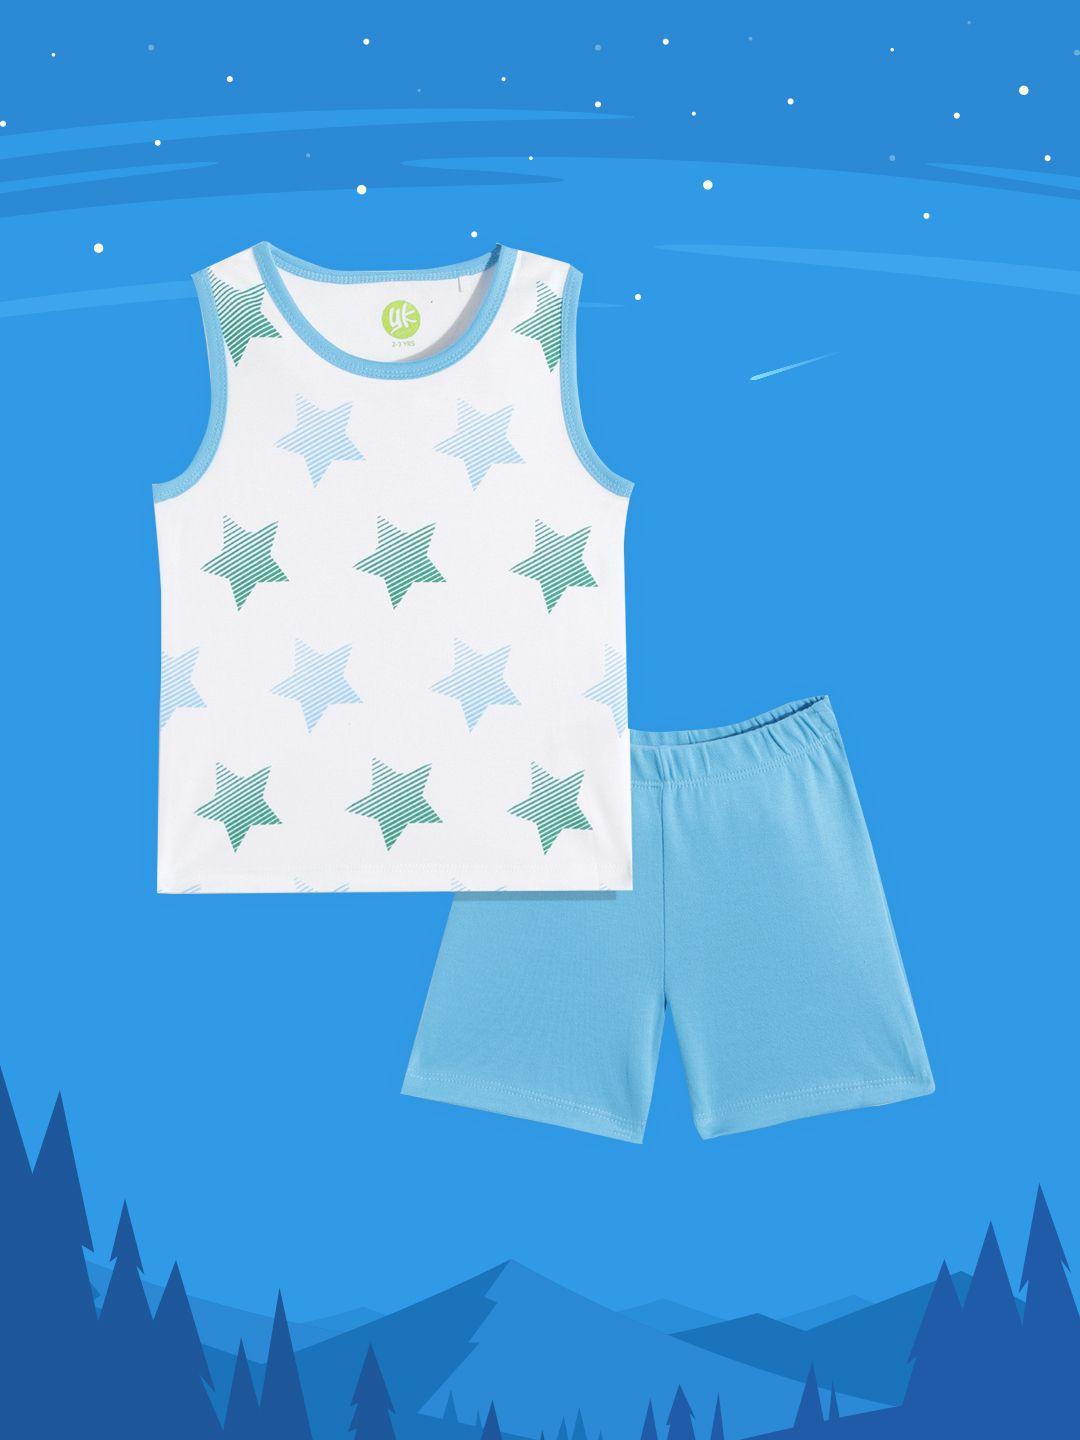 yk-infant-boys-white-&-blue-printed-cotton-t-shirt-with-shorts